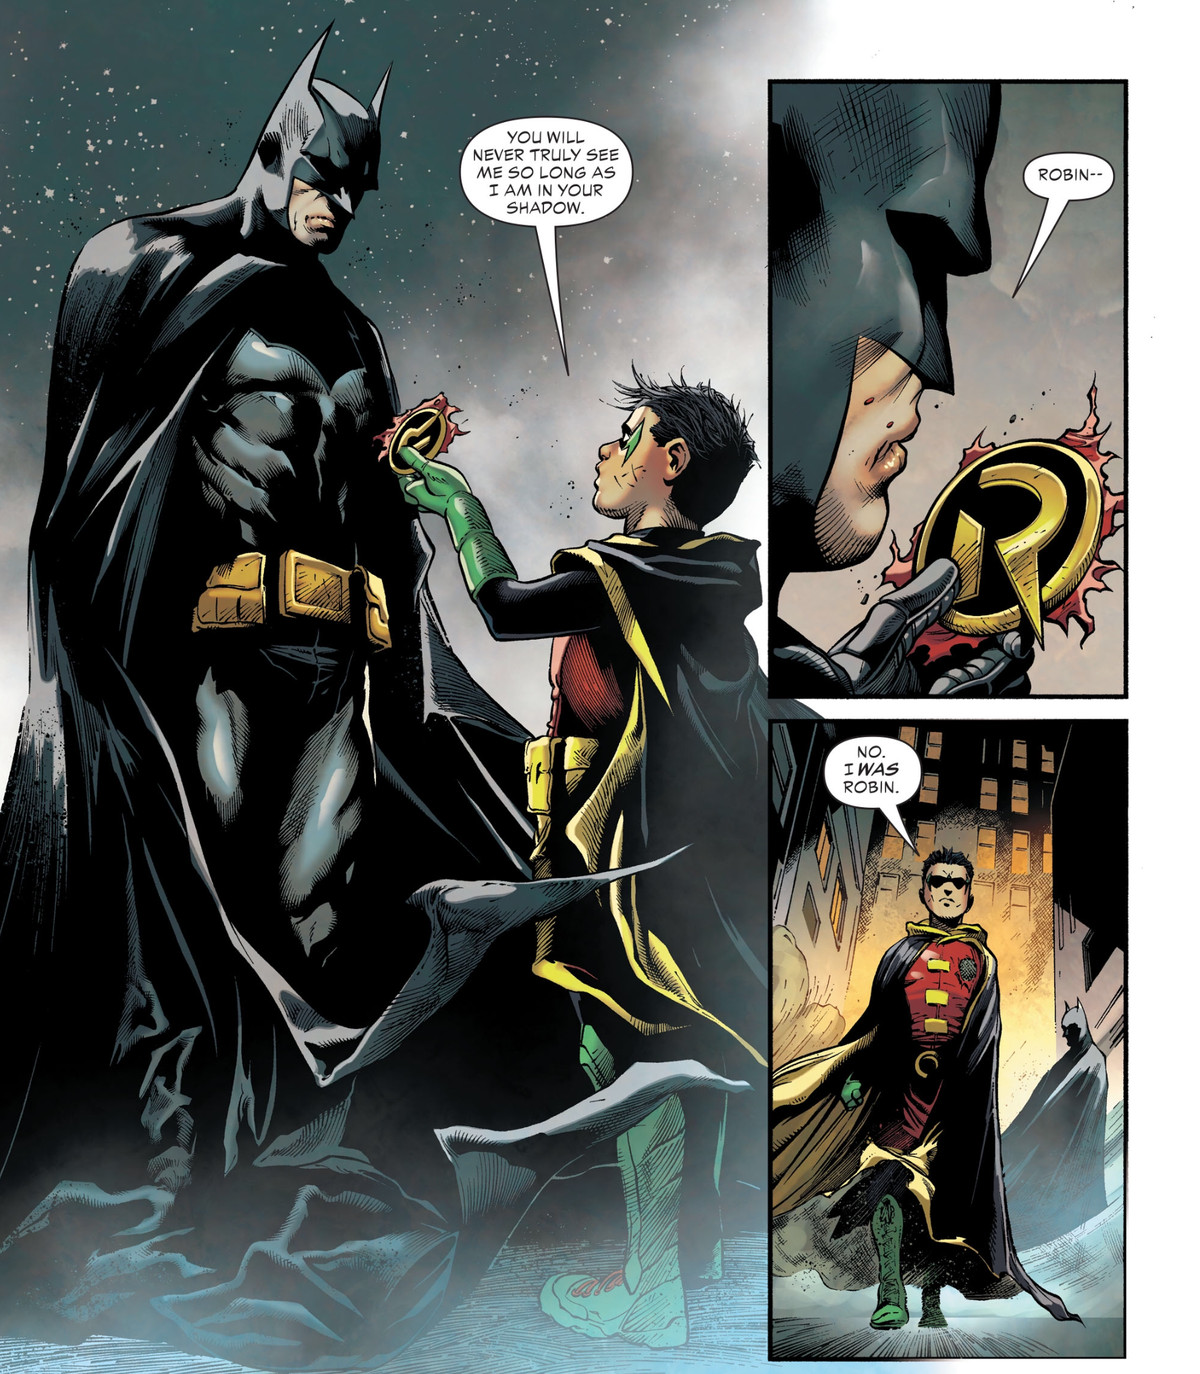 “You will never truly see me so long as I am in your shadow,” Robin says, as he hands the emblem from his costume to Batman, in Teen Titans Annual #2, DC Comics (2020). 